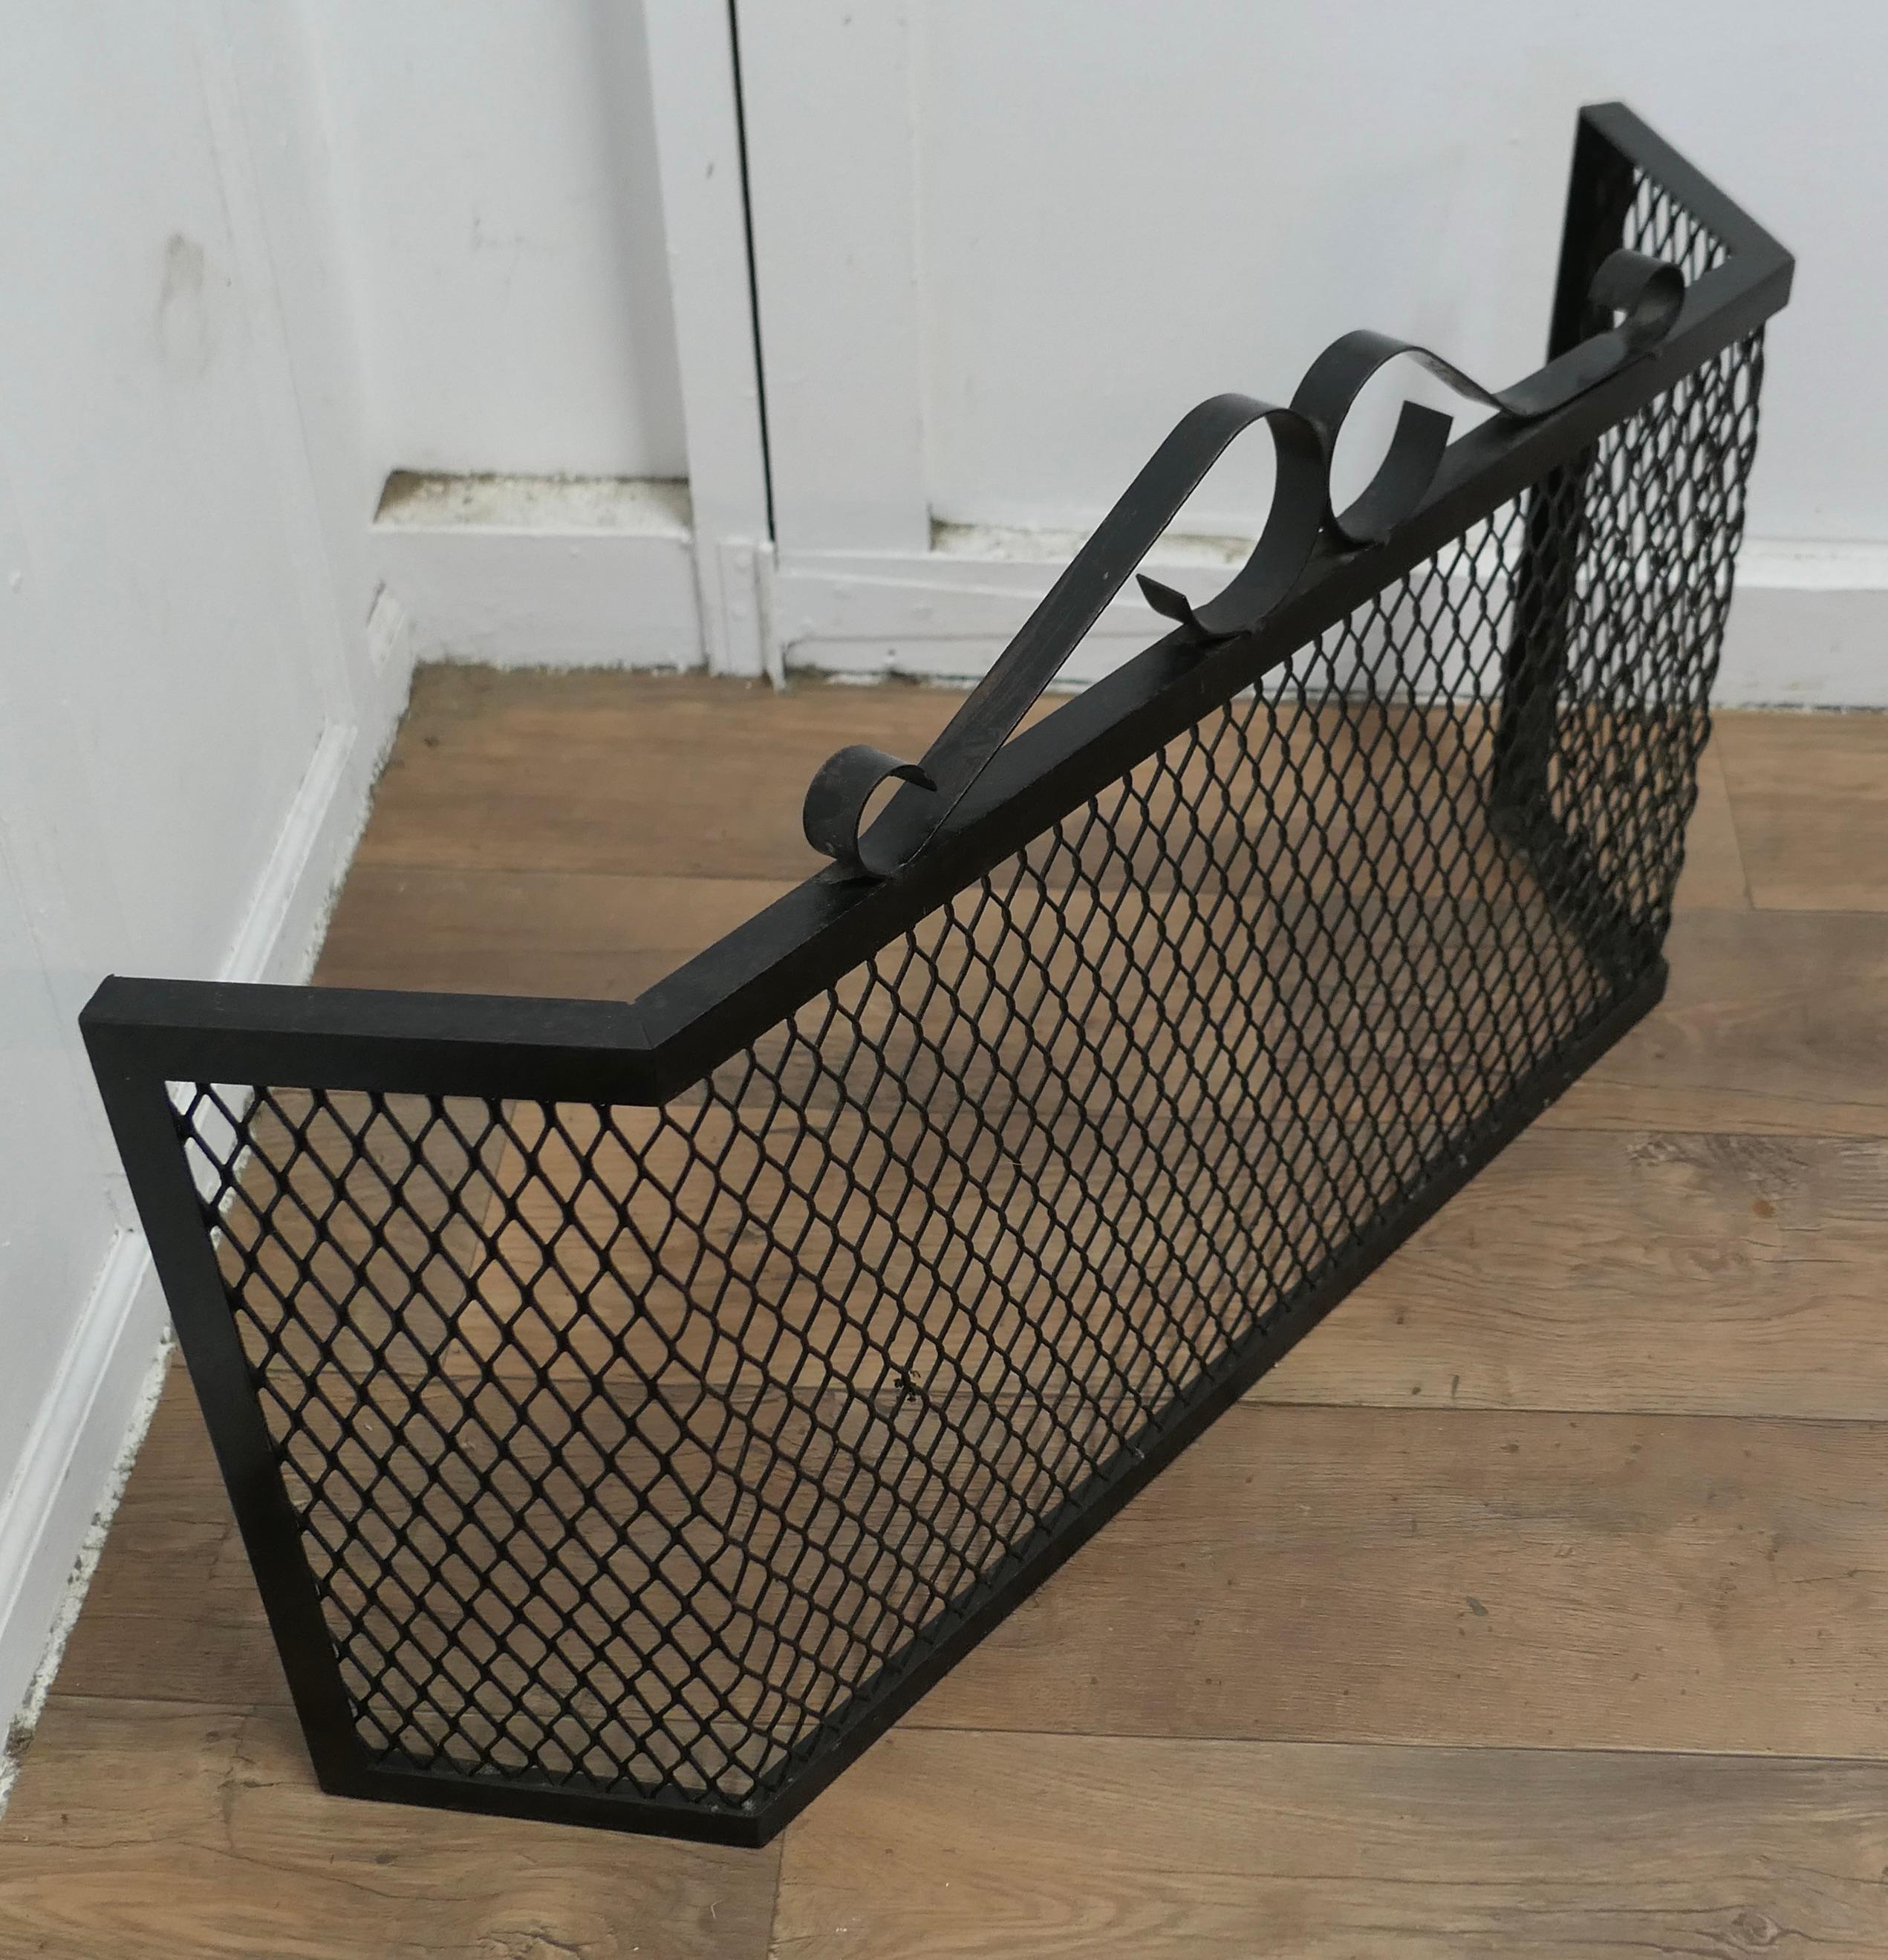 Mid-20th Century Unusual Heavy Iron Fire Guard   This is an unusual Fireguard  For Sale